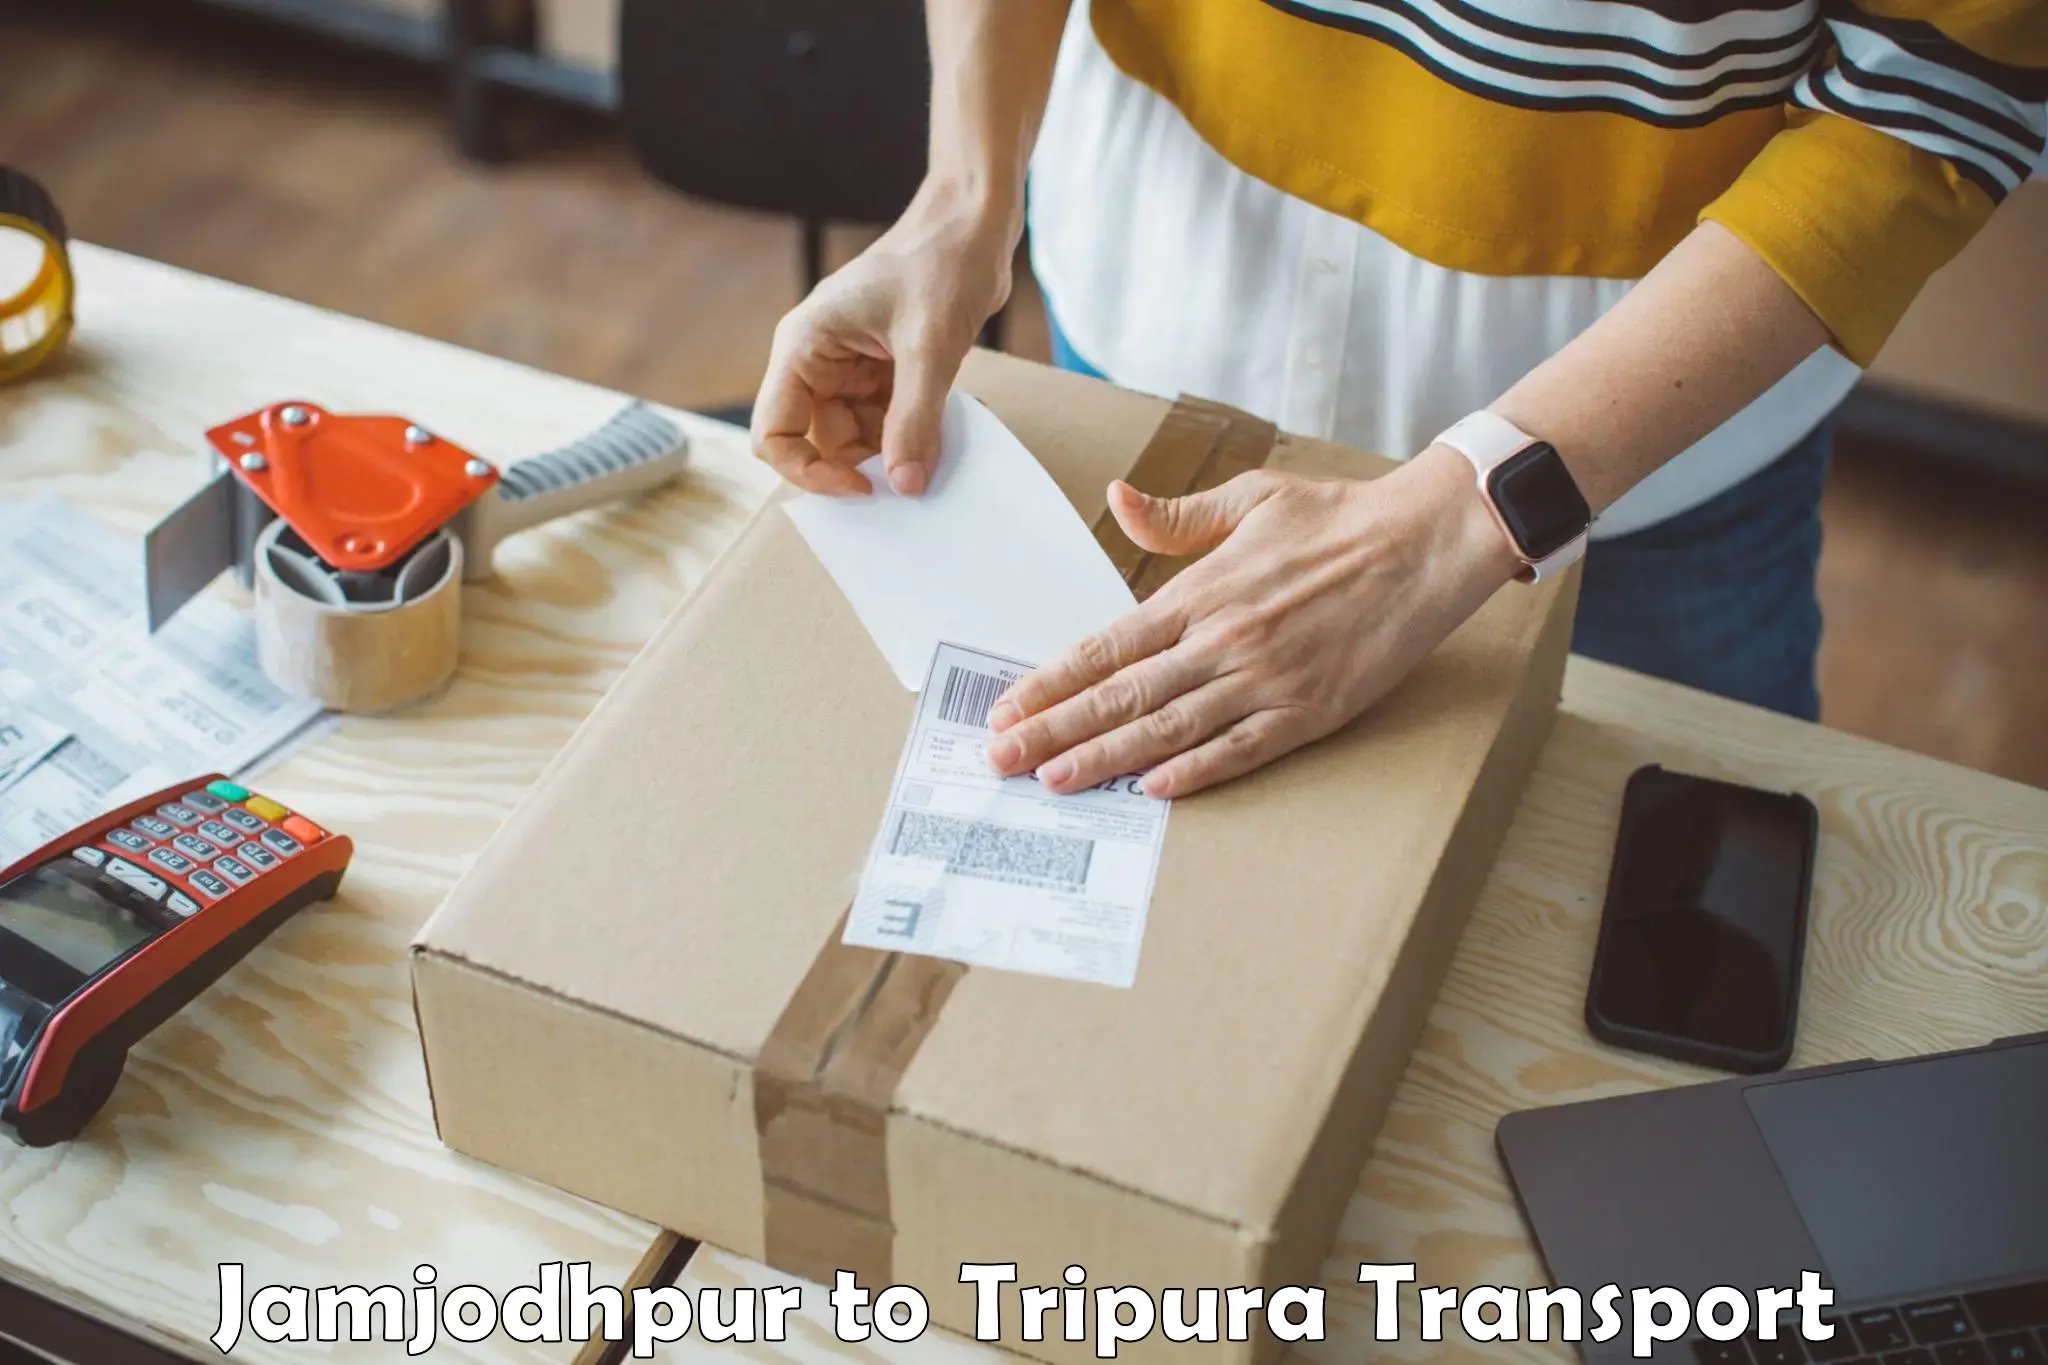 Package delivery services Jamjodhpur to Udaipur Tripura